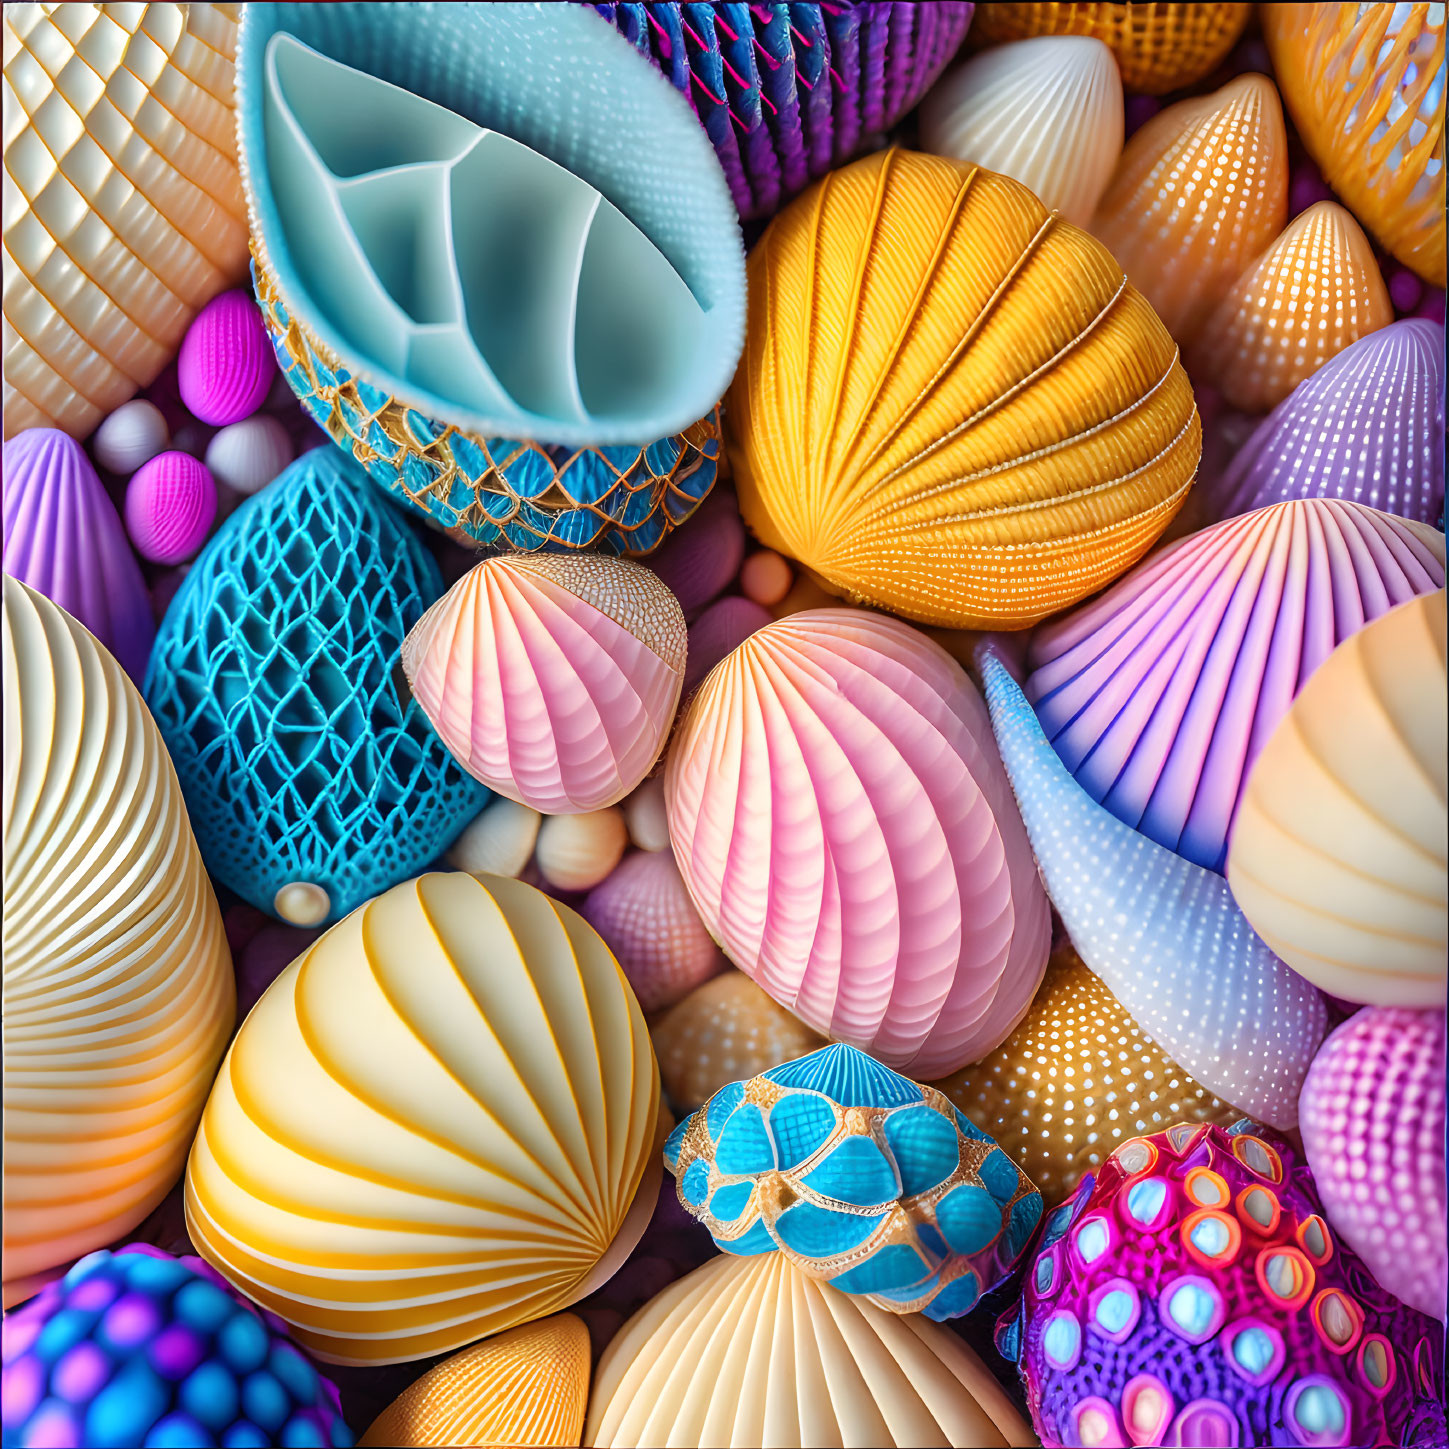 Colorful 3D digital shells in intricate patterns